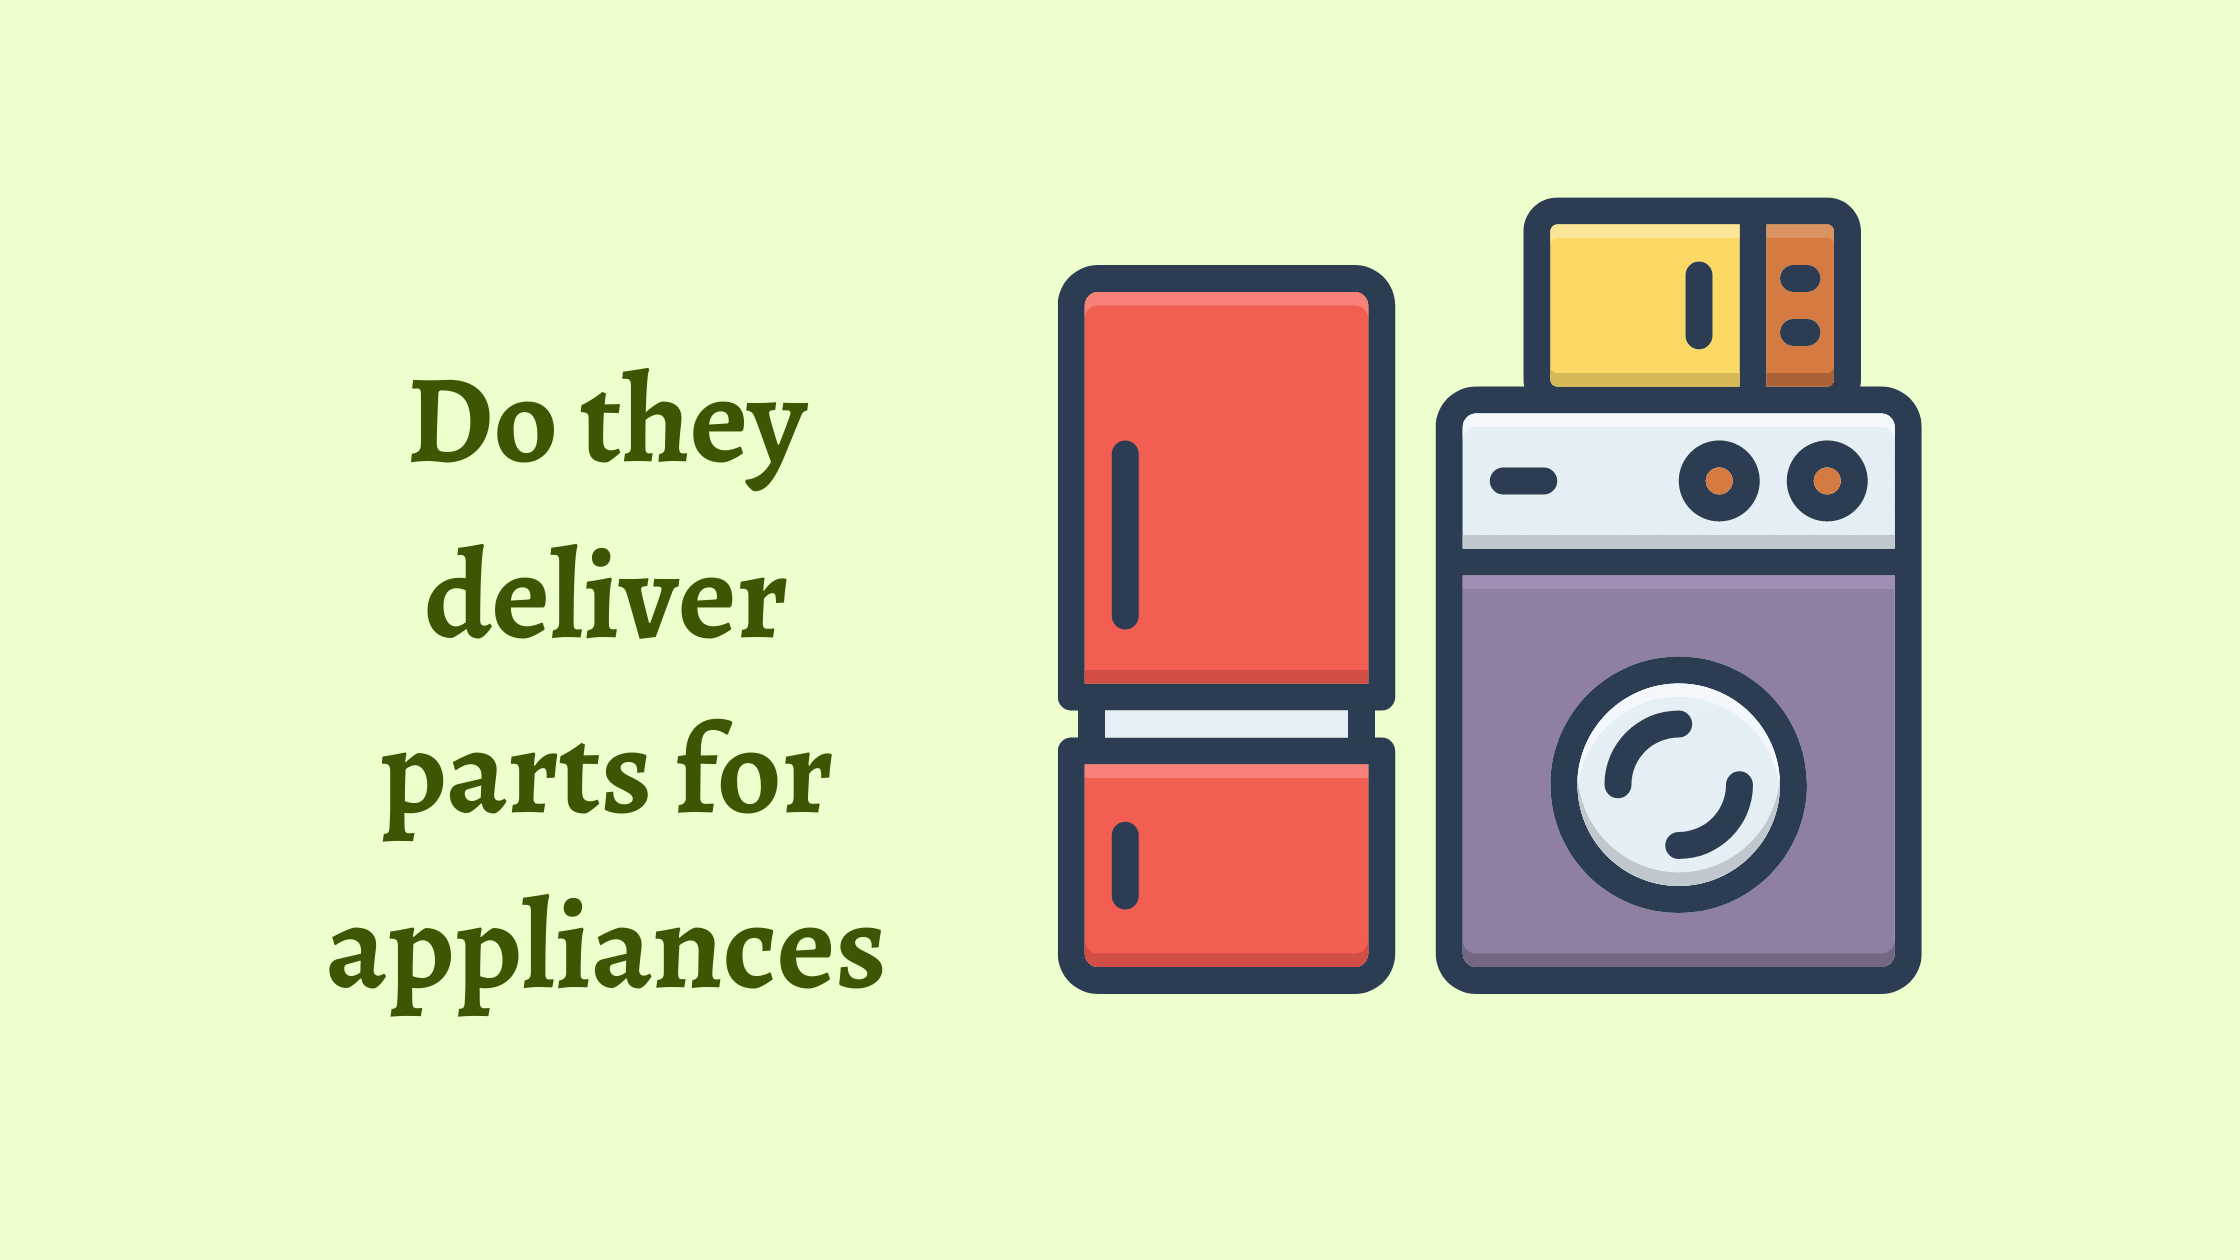 they deliver parts for appliances